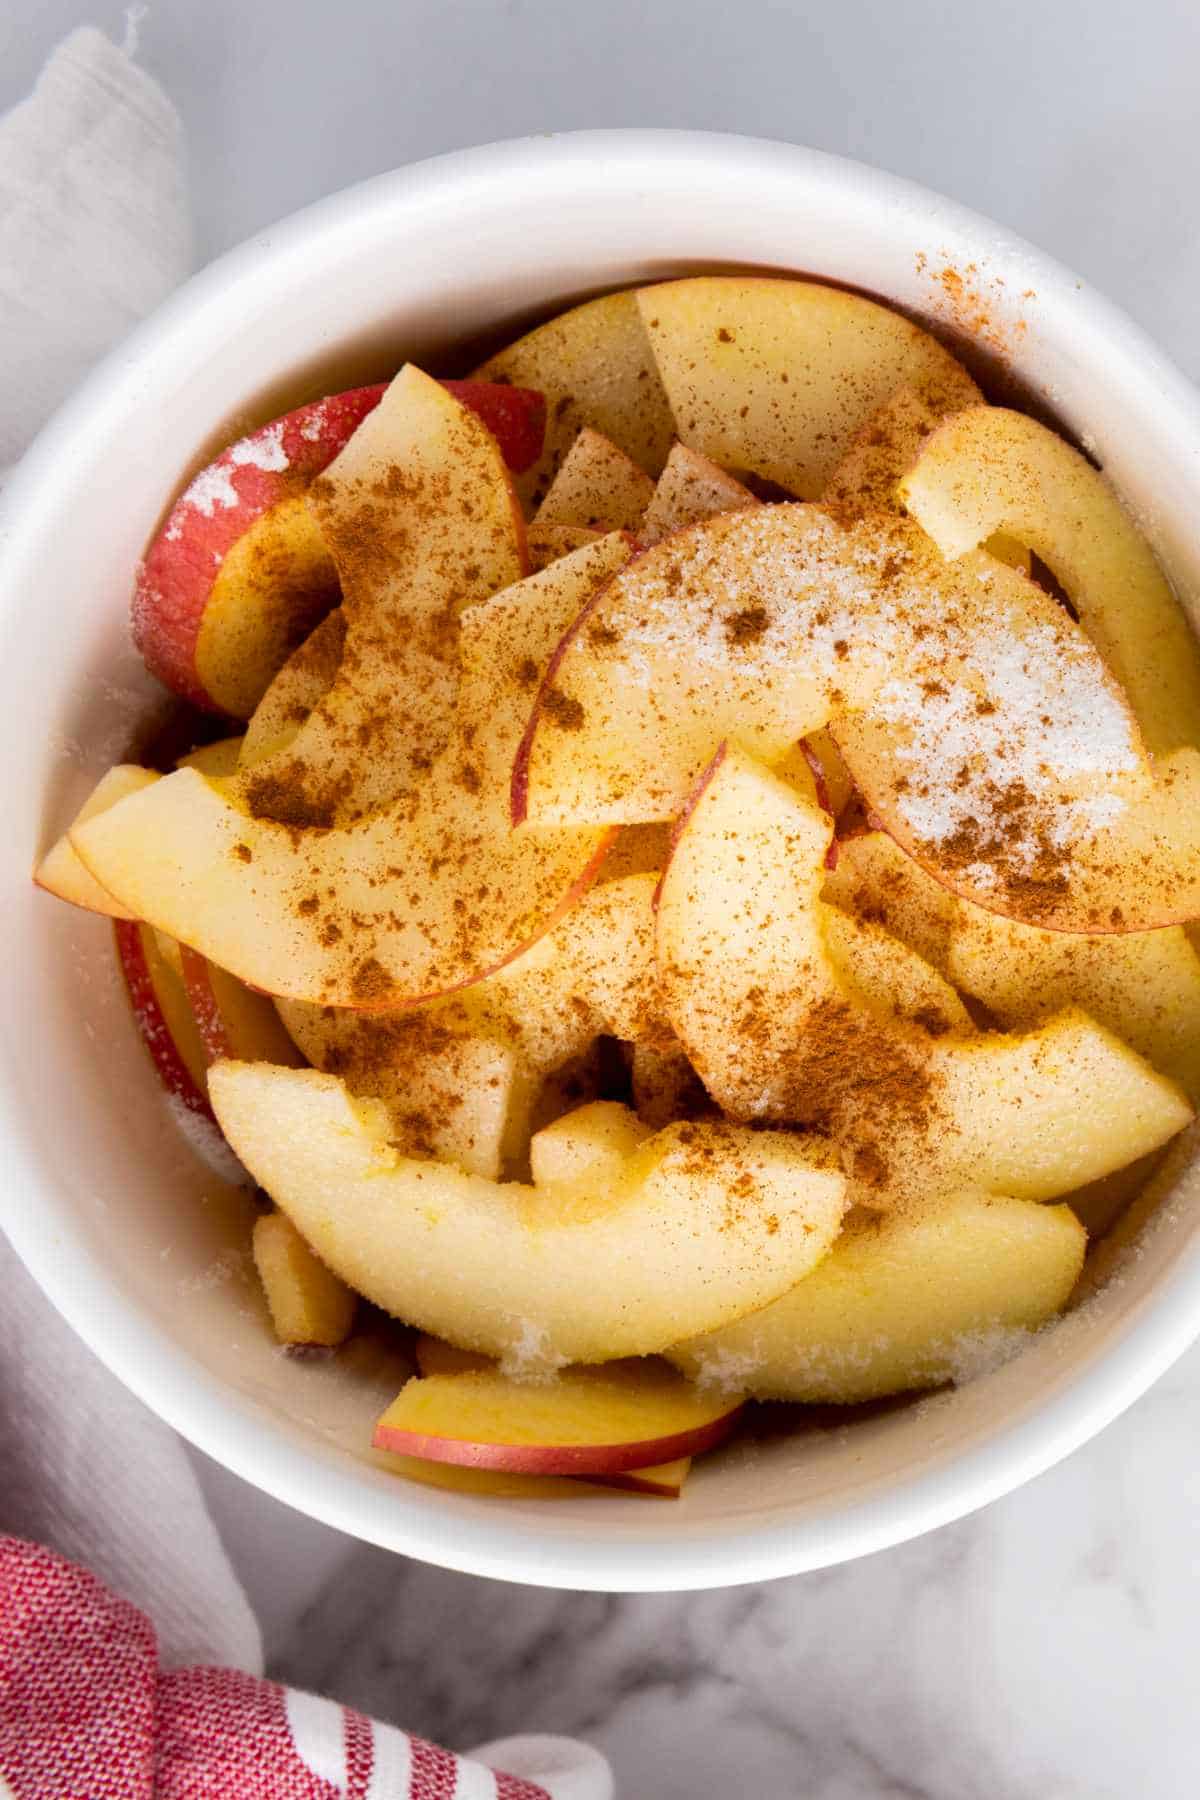 sliced apples in a bowl with sugar and cinnamon.